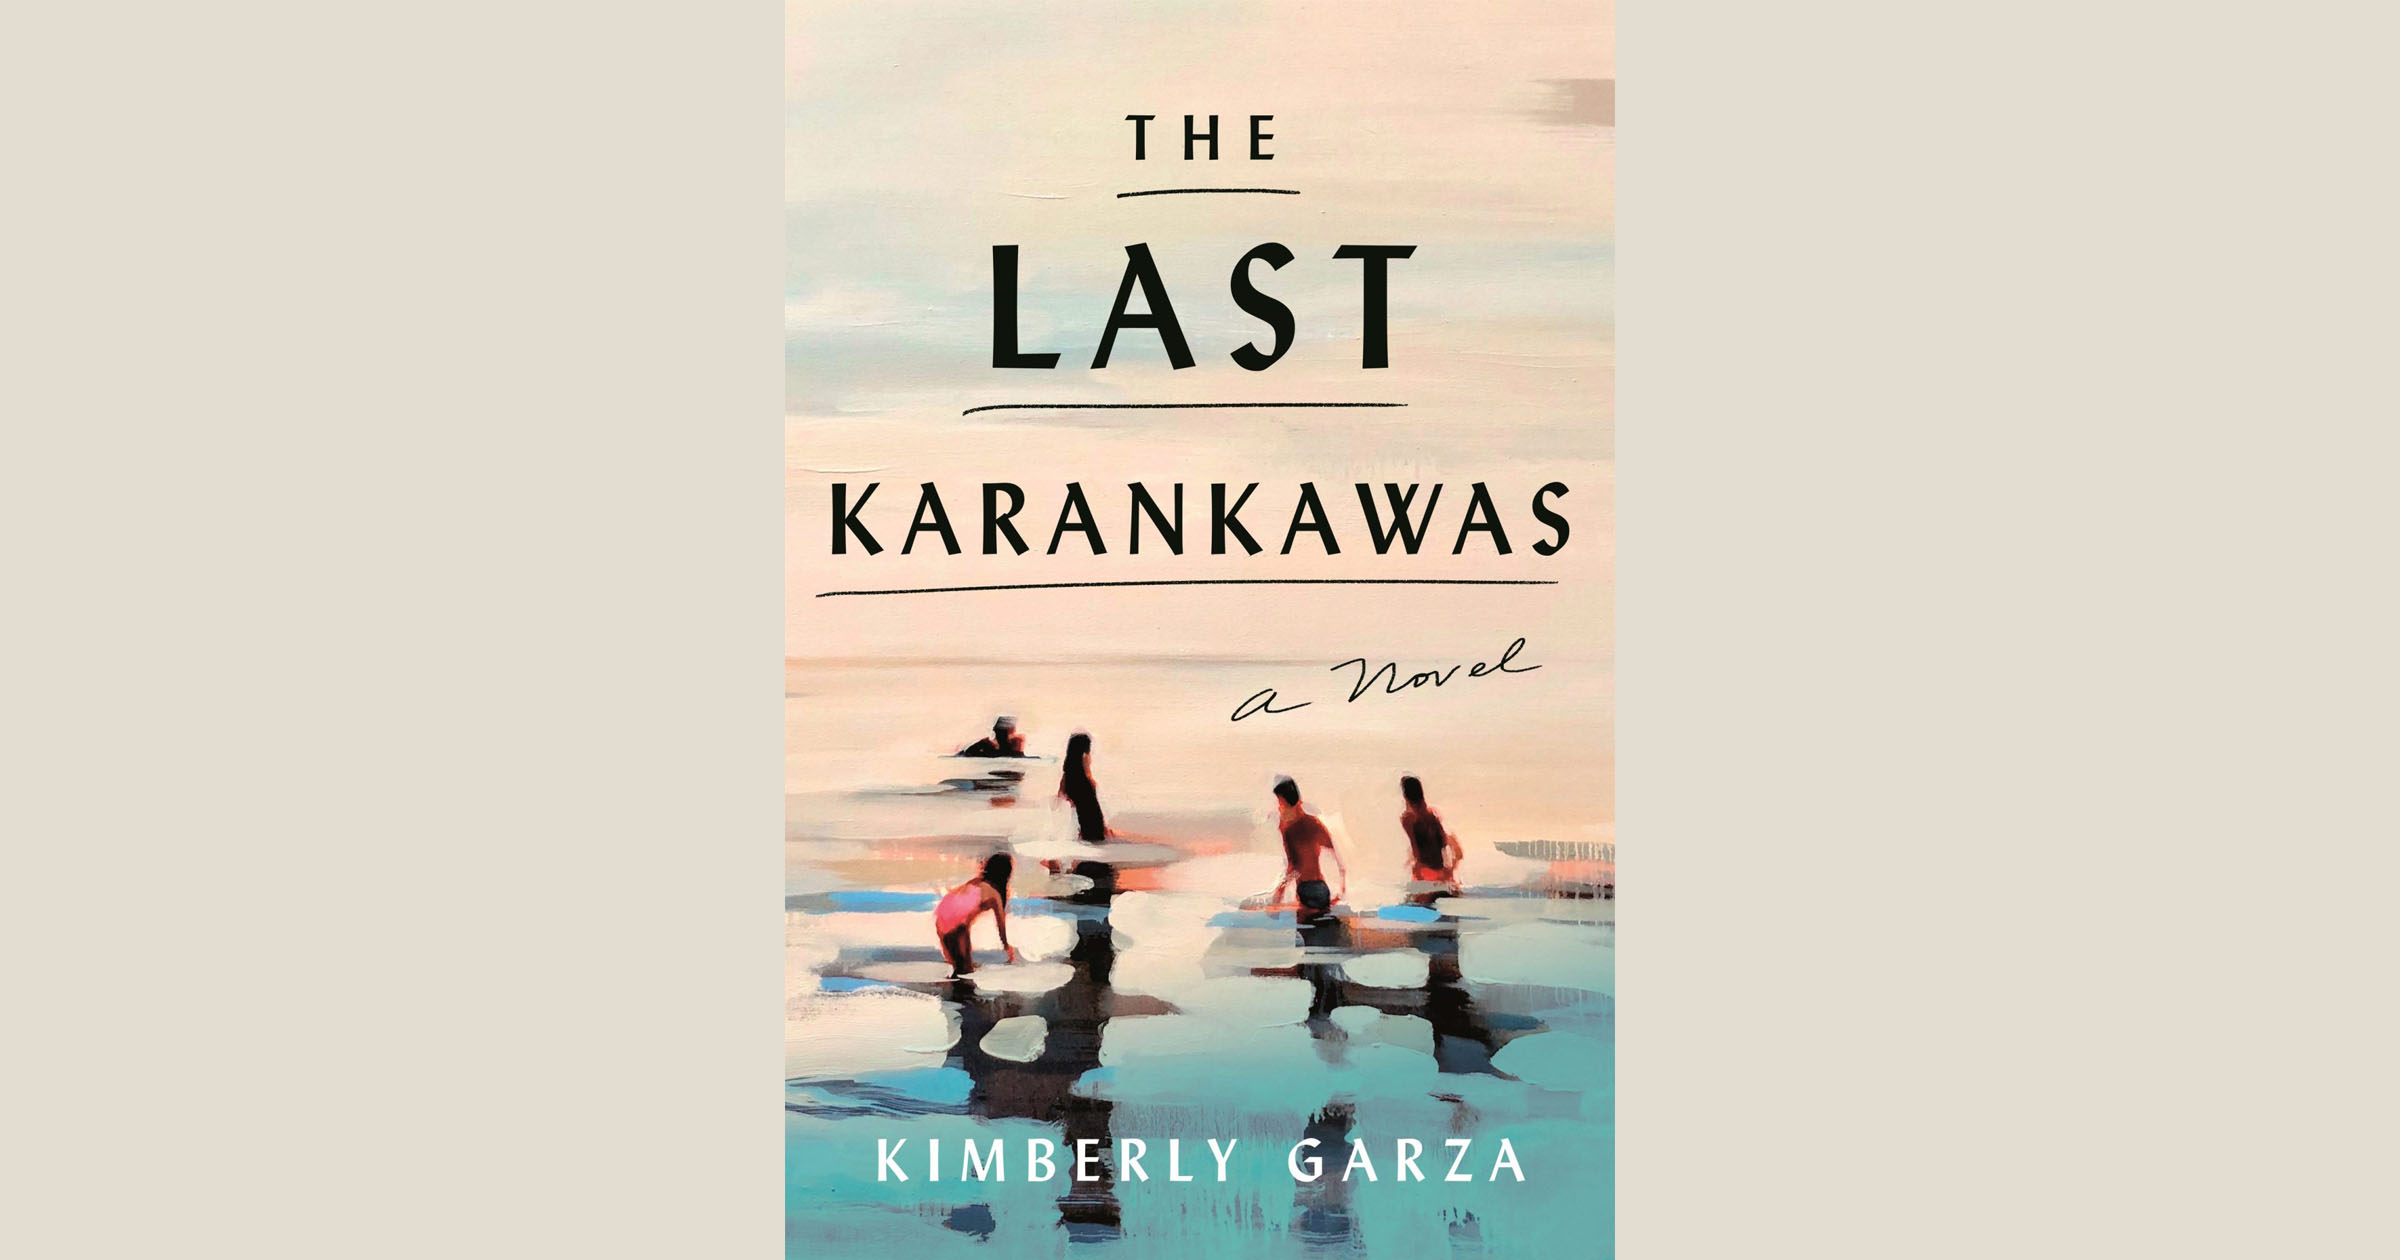 An illustrated book cover showing people in water underneath the title 'The Last Karankawas'